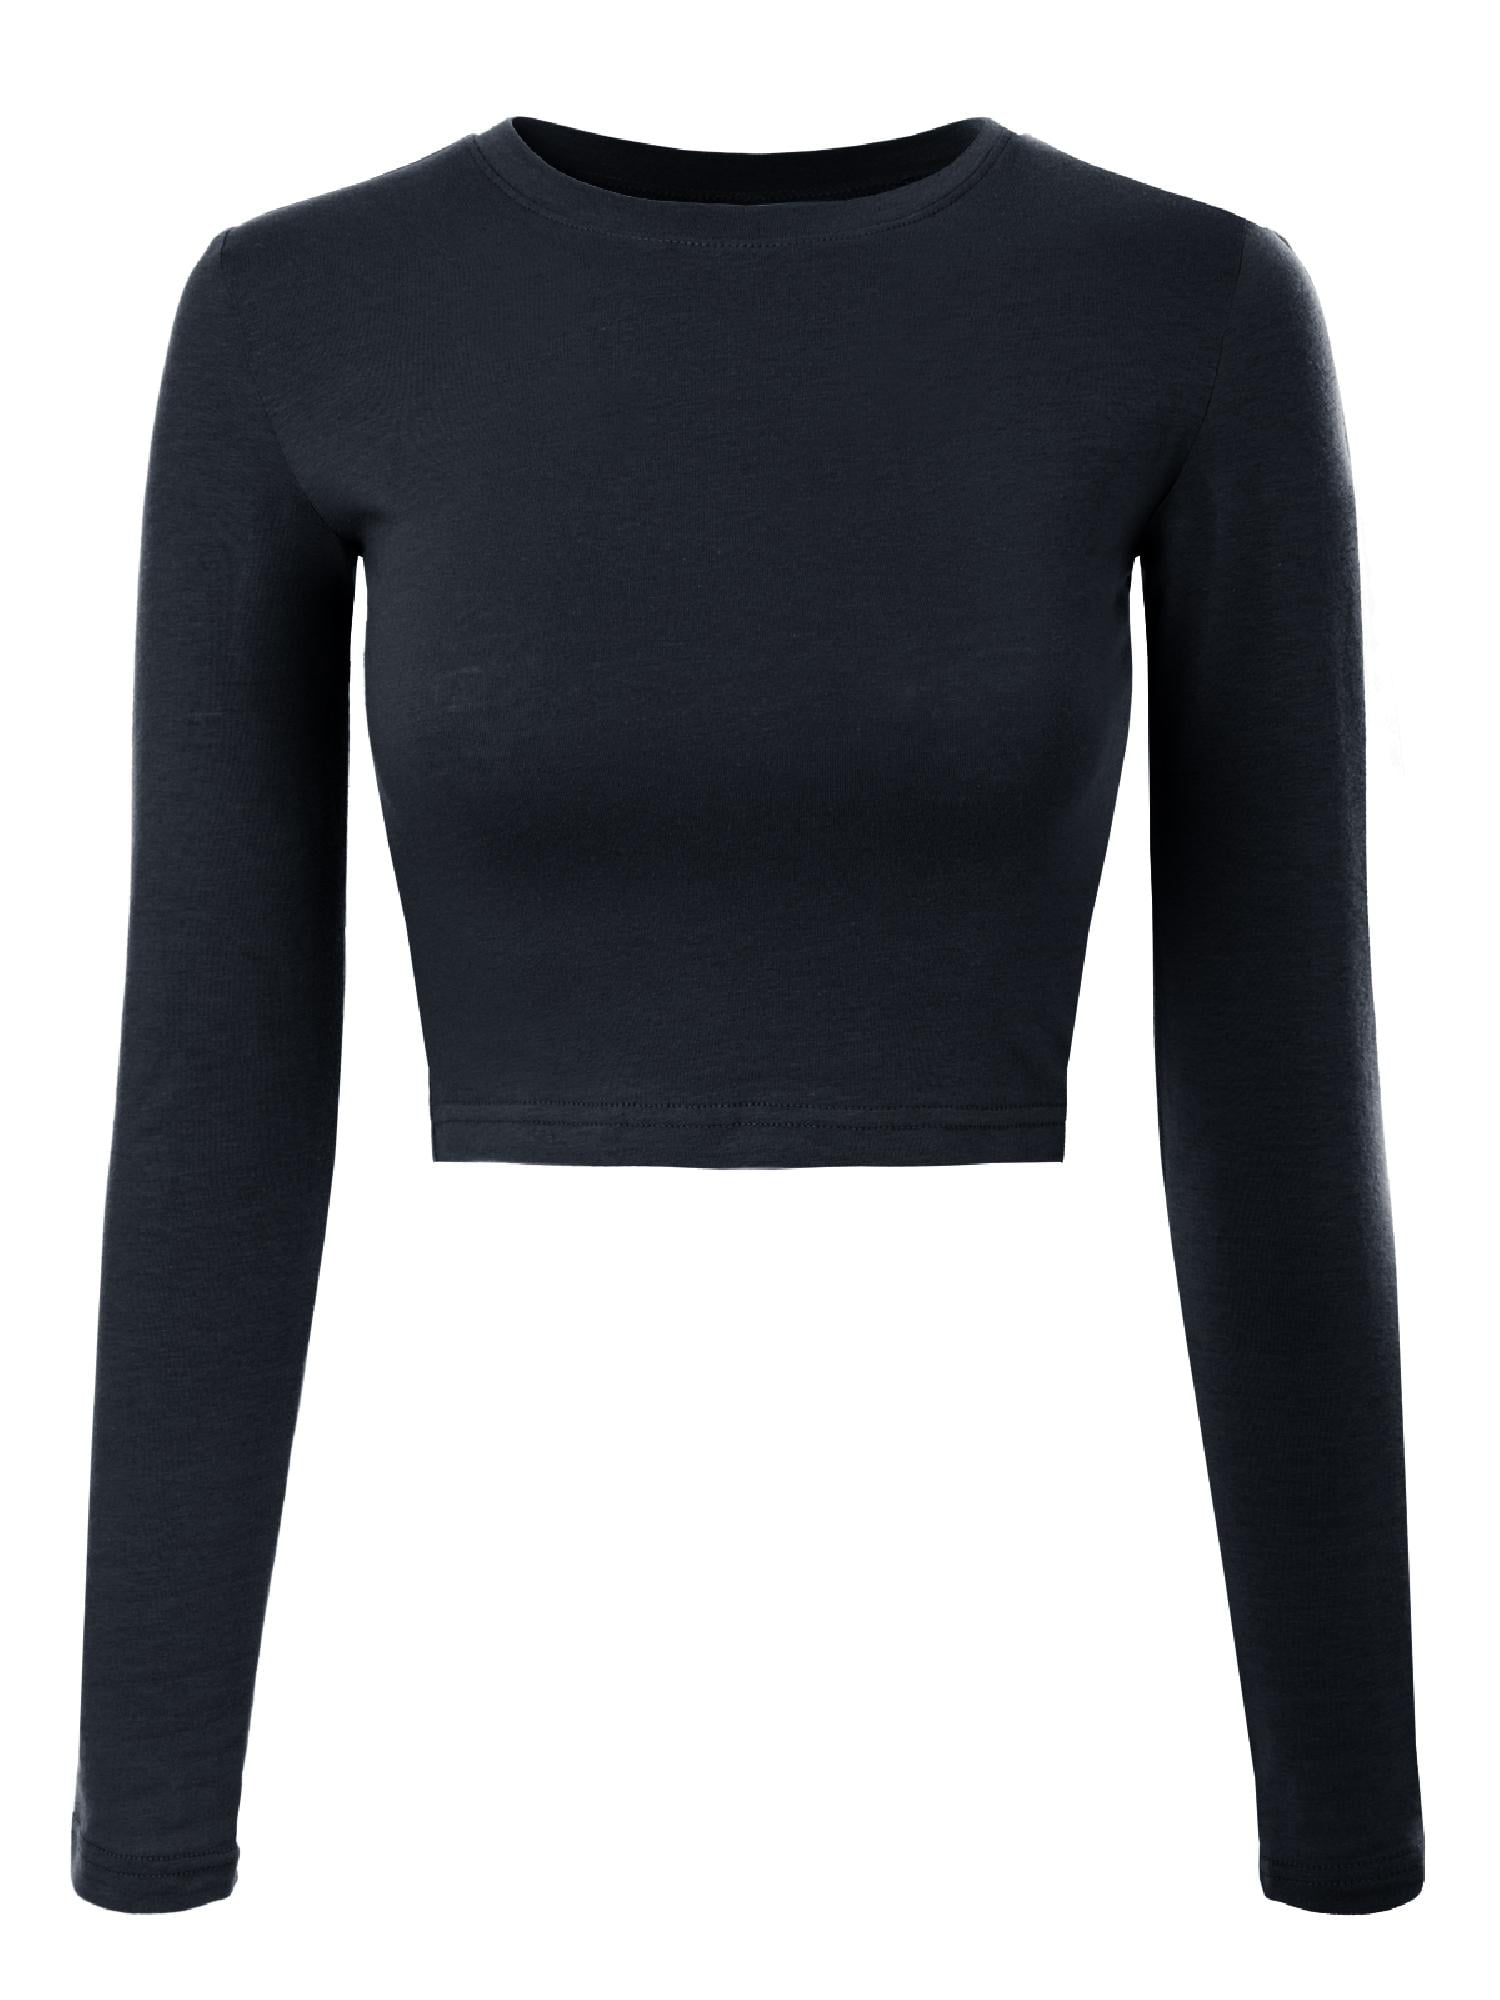 Made by Olivia Women's Solid Long Sleeve Round Neck Crop T Shirt Top ...